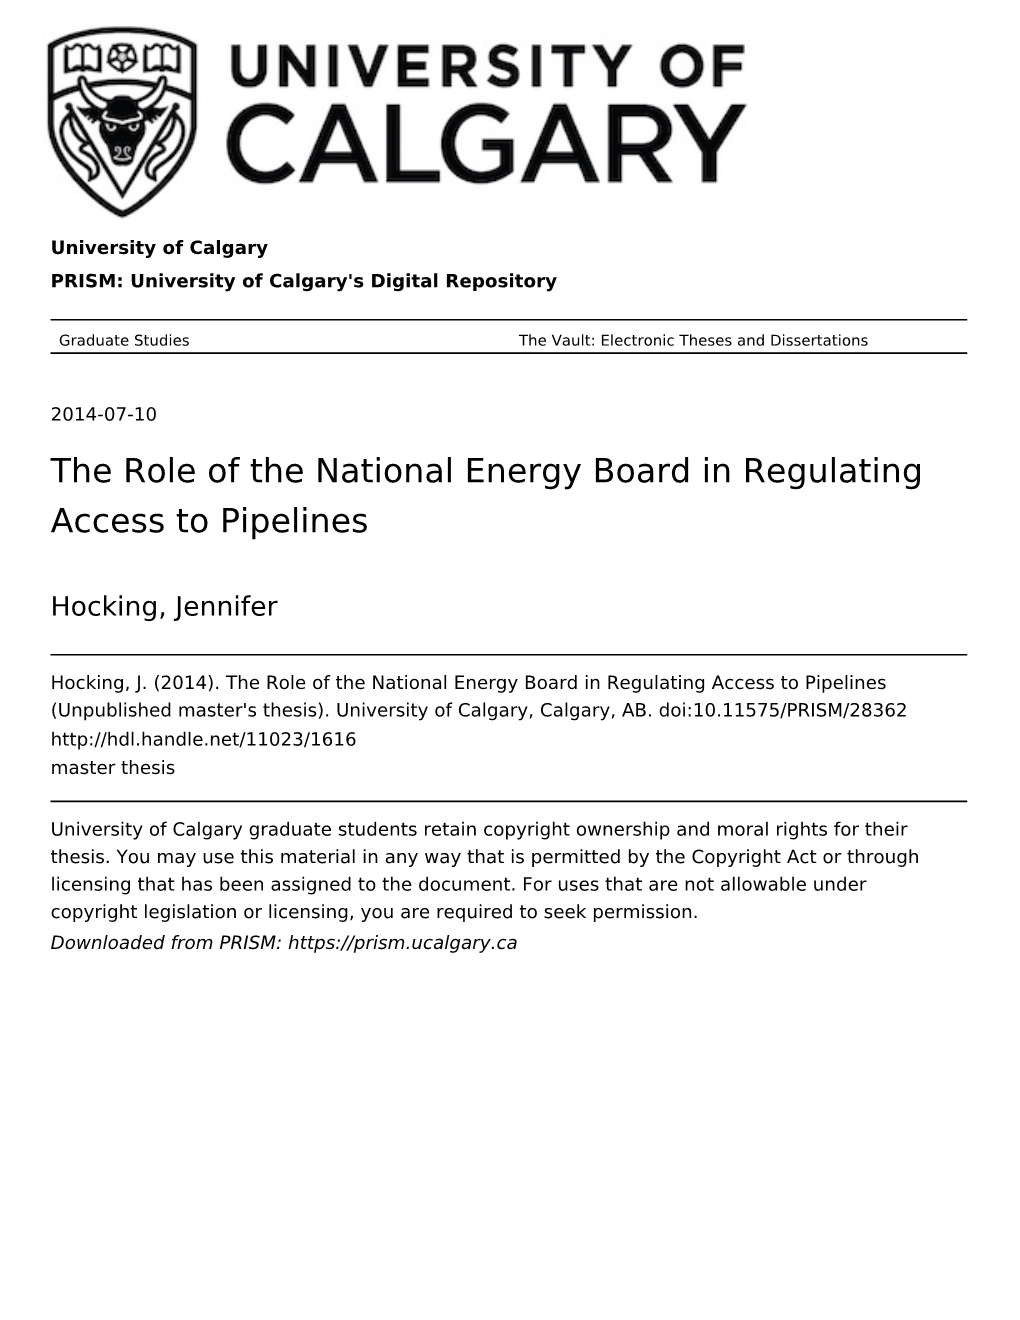 The Role of the National Energy Board in Regulating Access to Pipelines